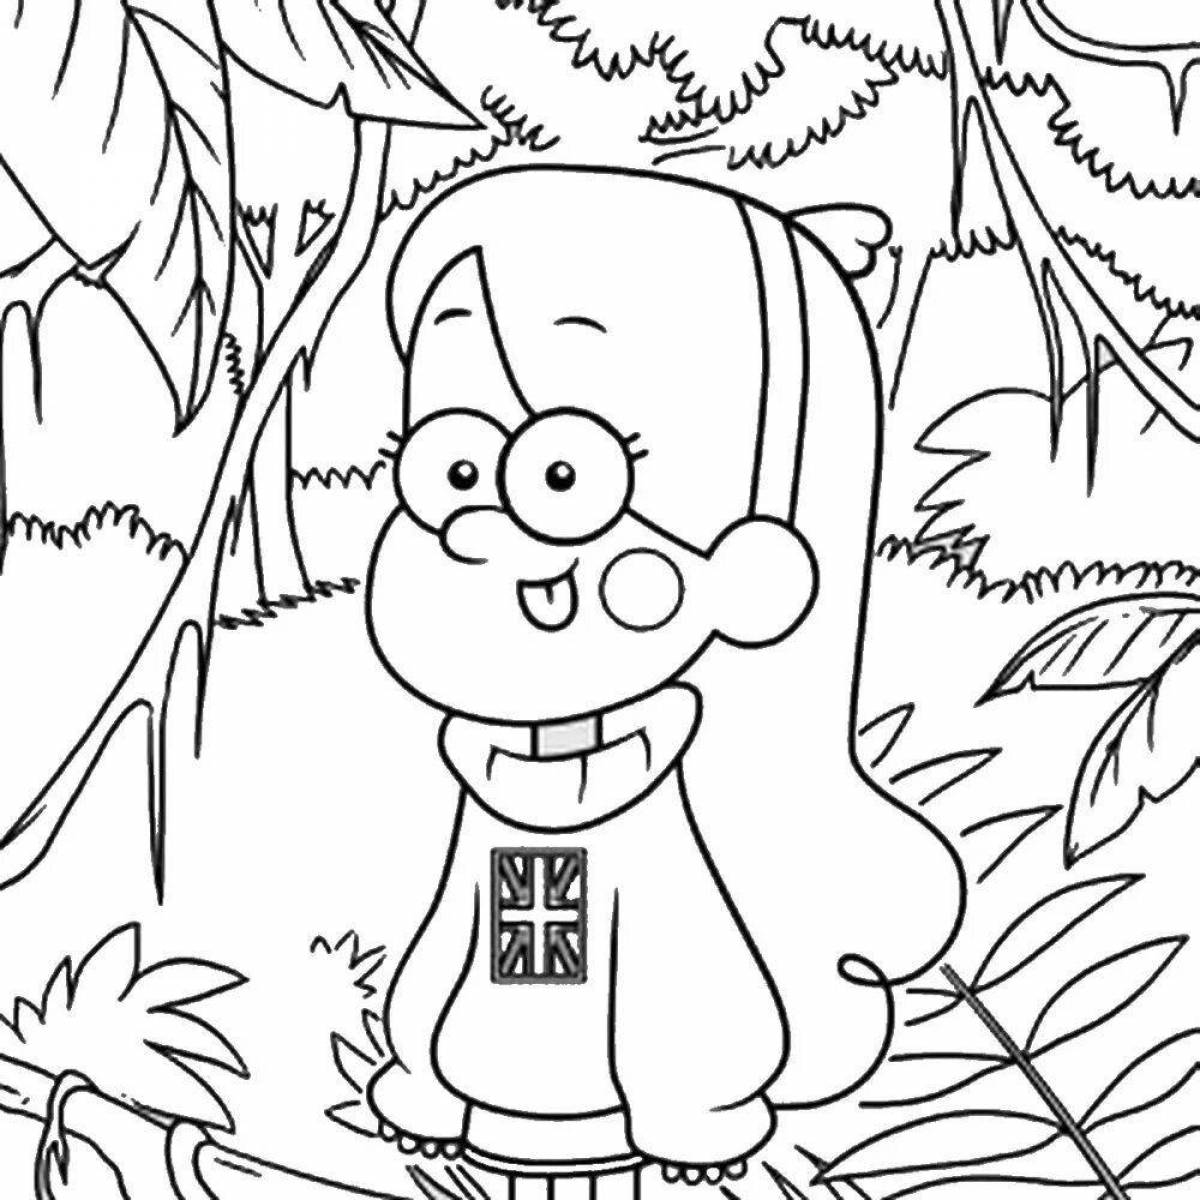 Color-frenzy coloring page for 11 year olds